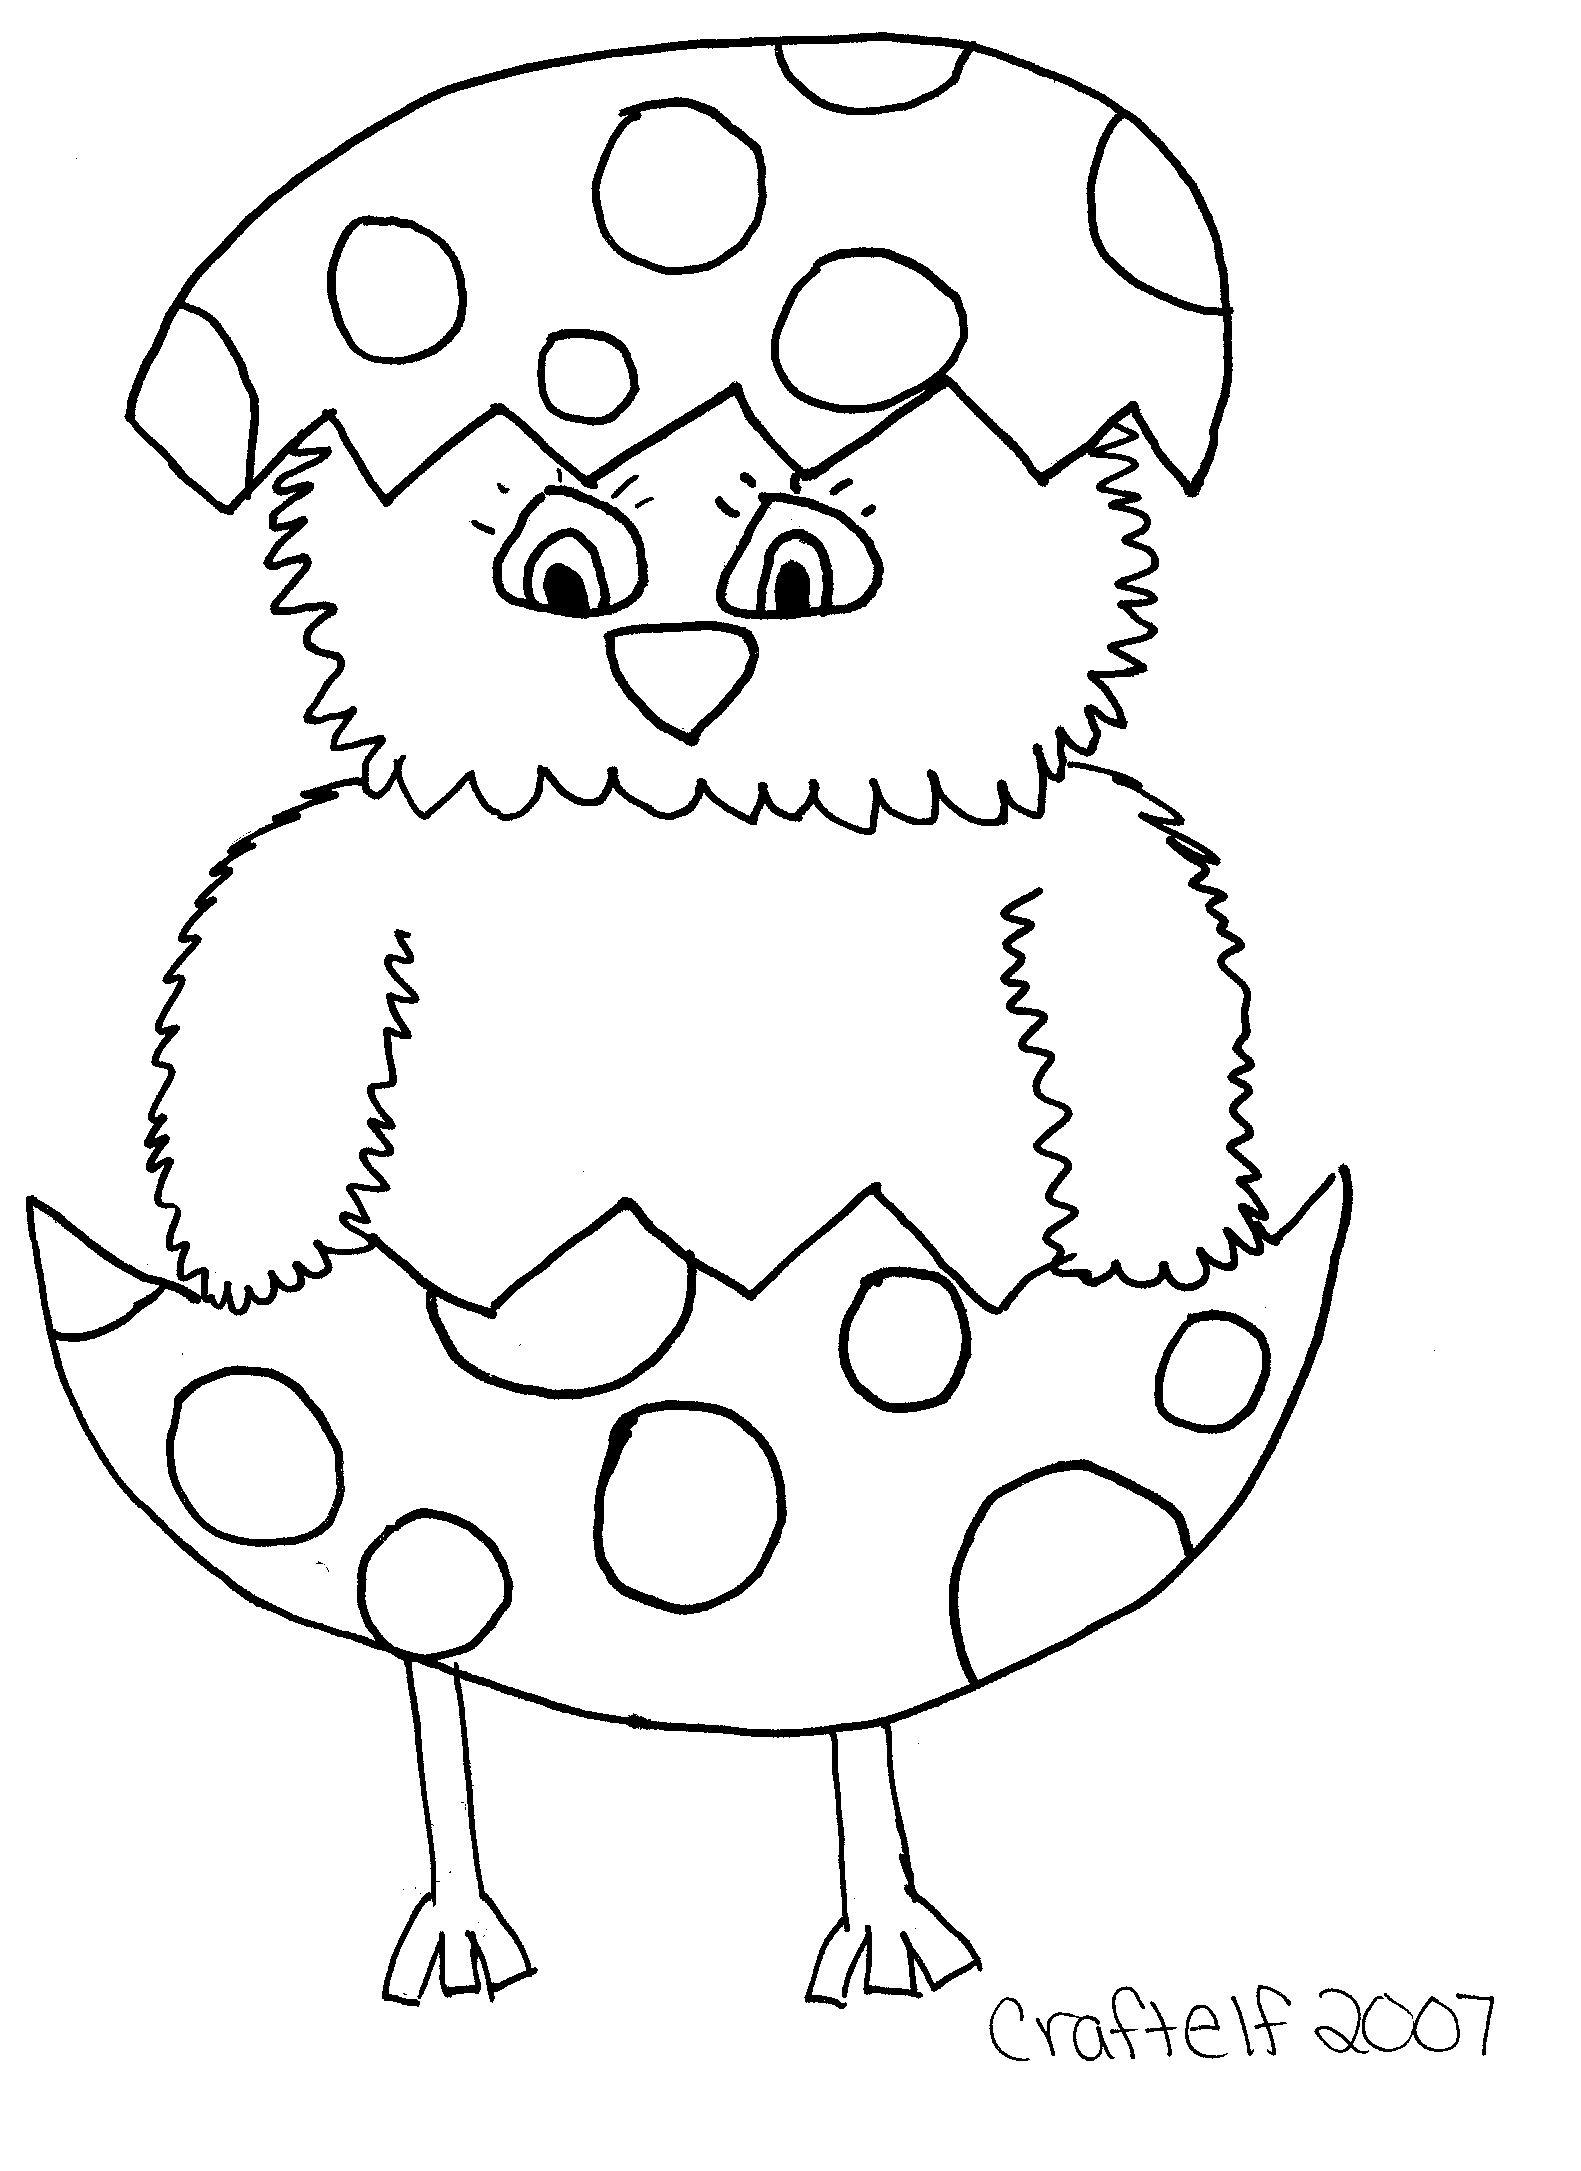 Coloring Pages : Religeous Easter Coloring Pages Printable Free For - Free Printable Easter Coloring Pages For Toddlers